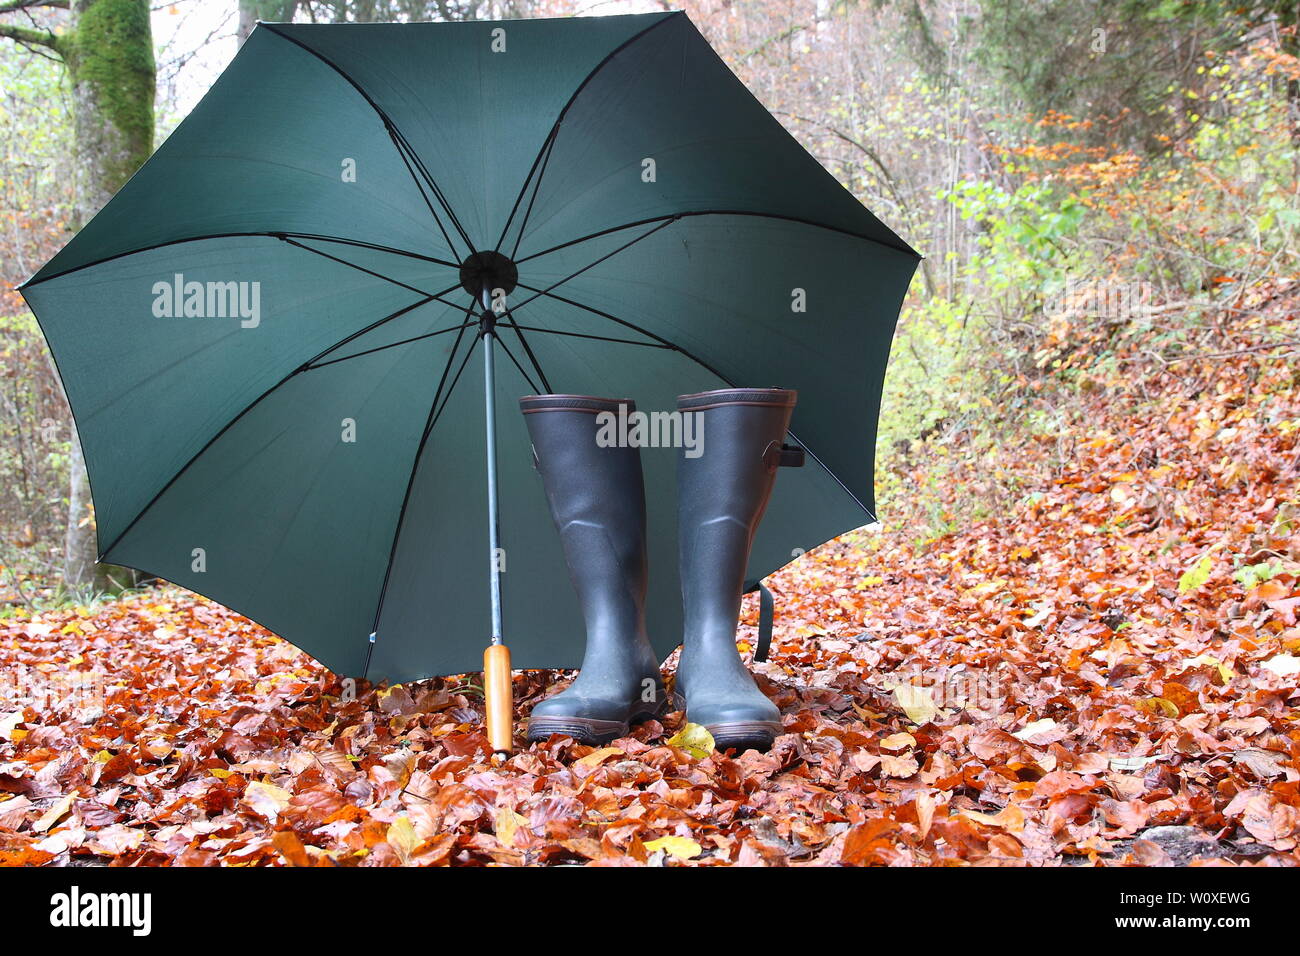 Accessories for rainy days in autumn. Stock Photo